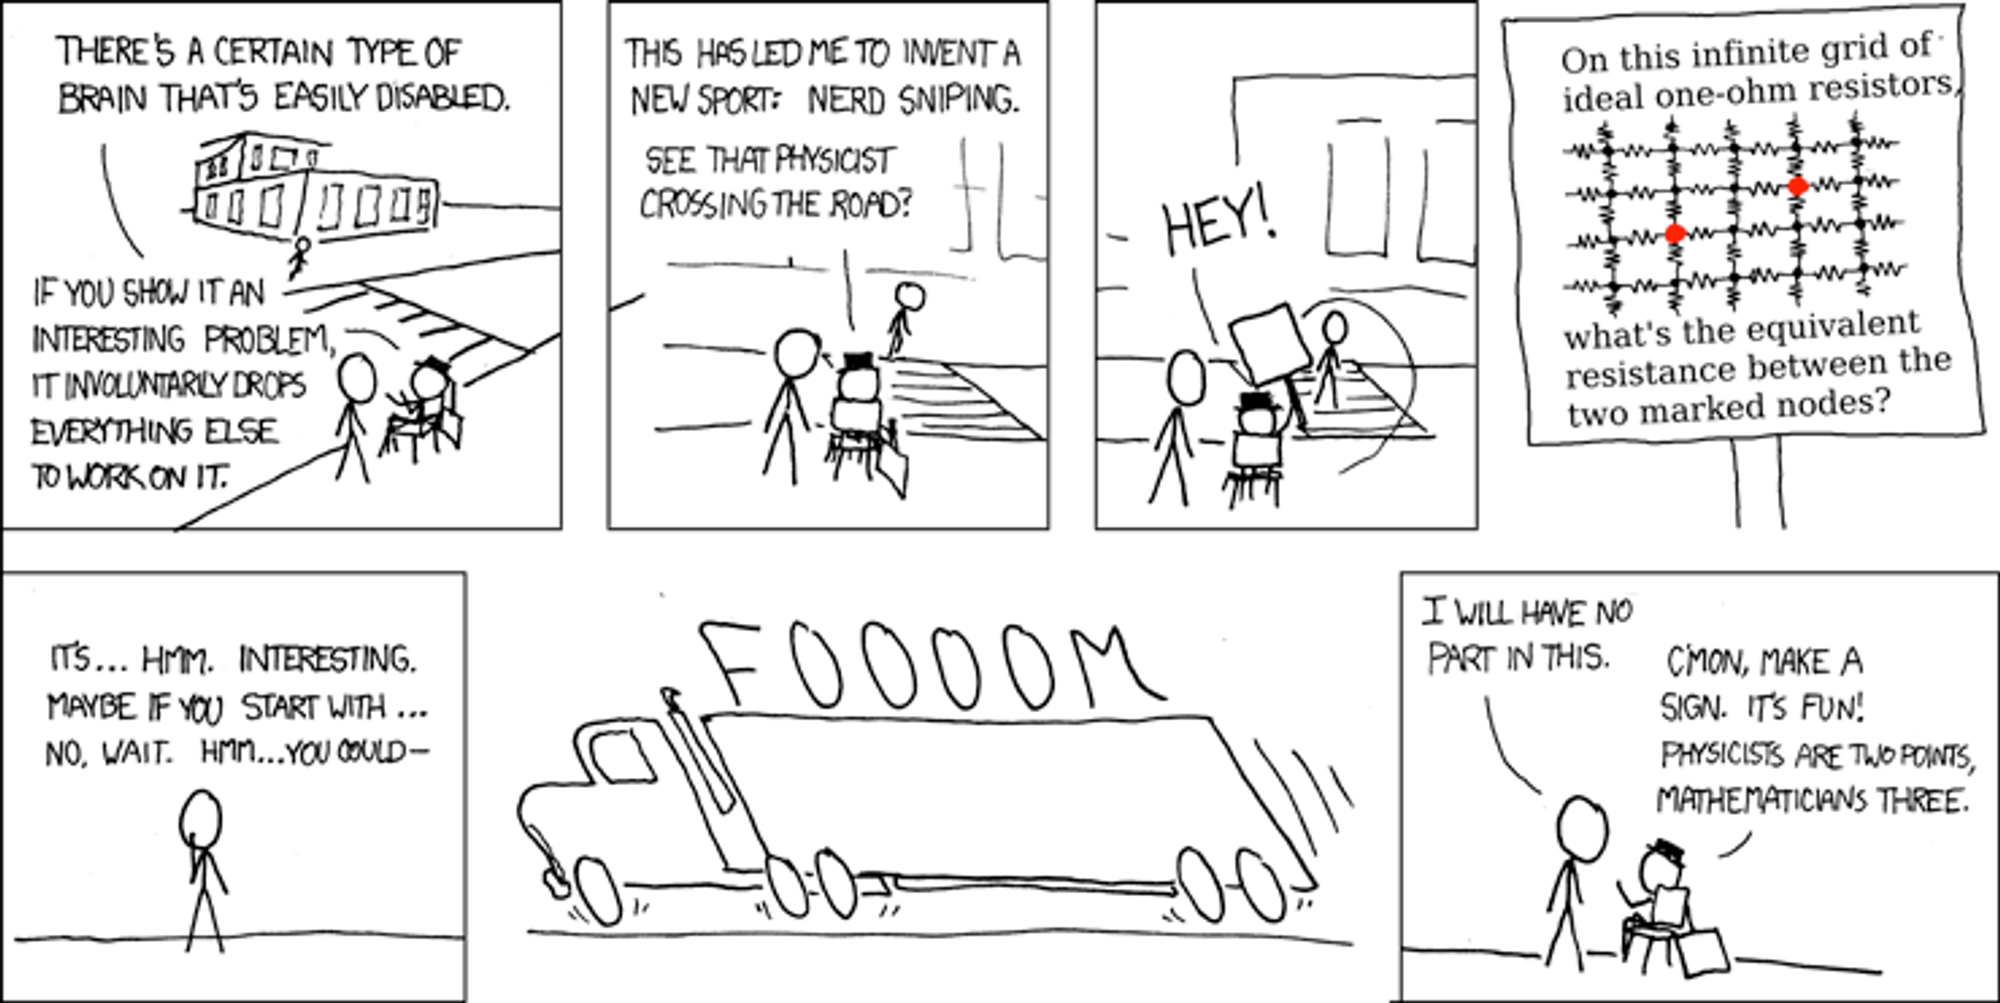 xkcd “Nerd Sniping” - Image source: https://xkcd.com/356/